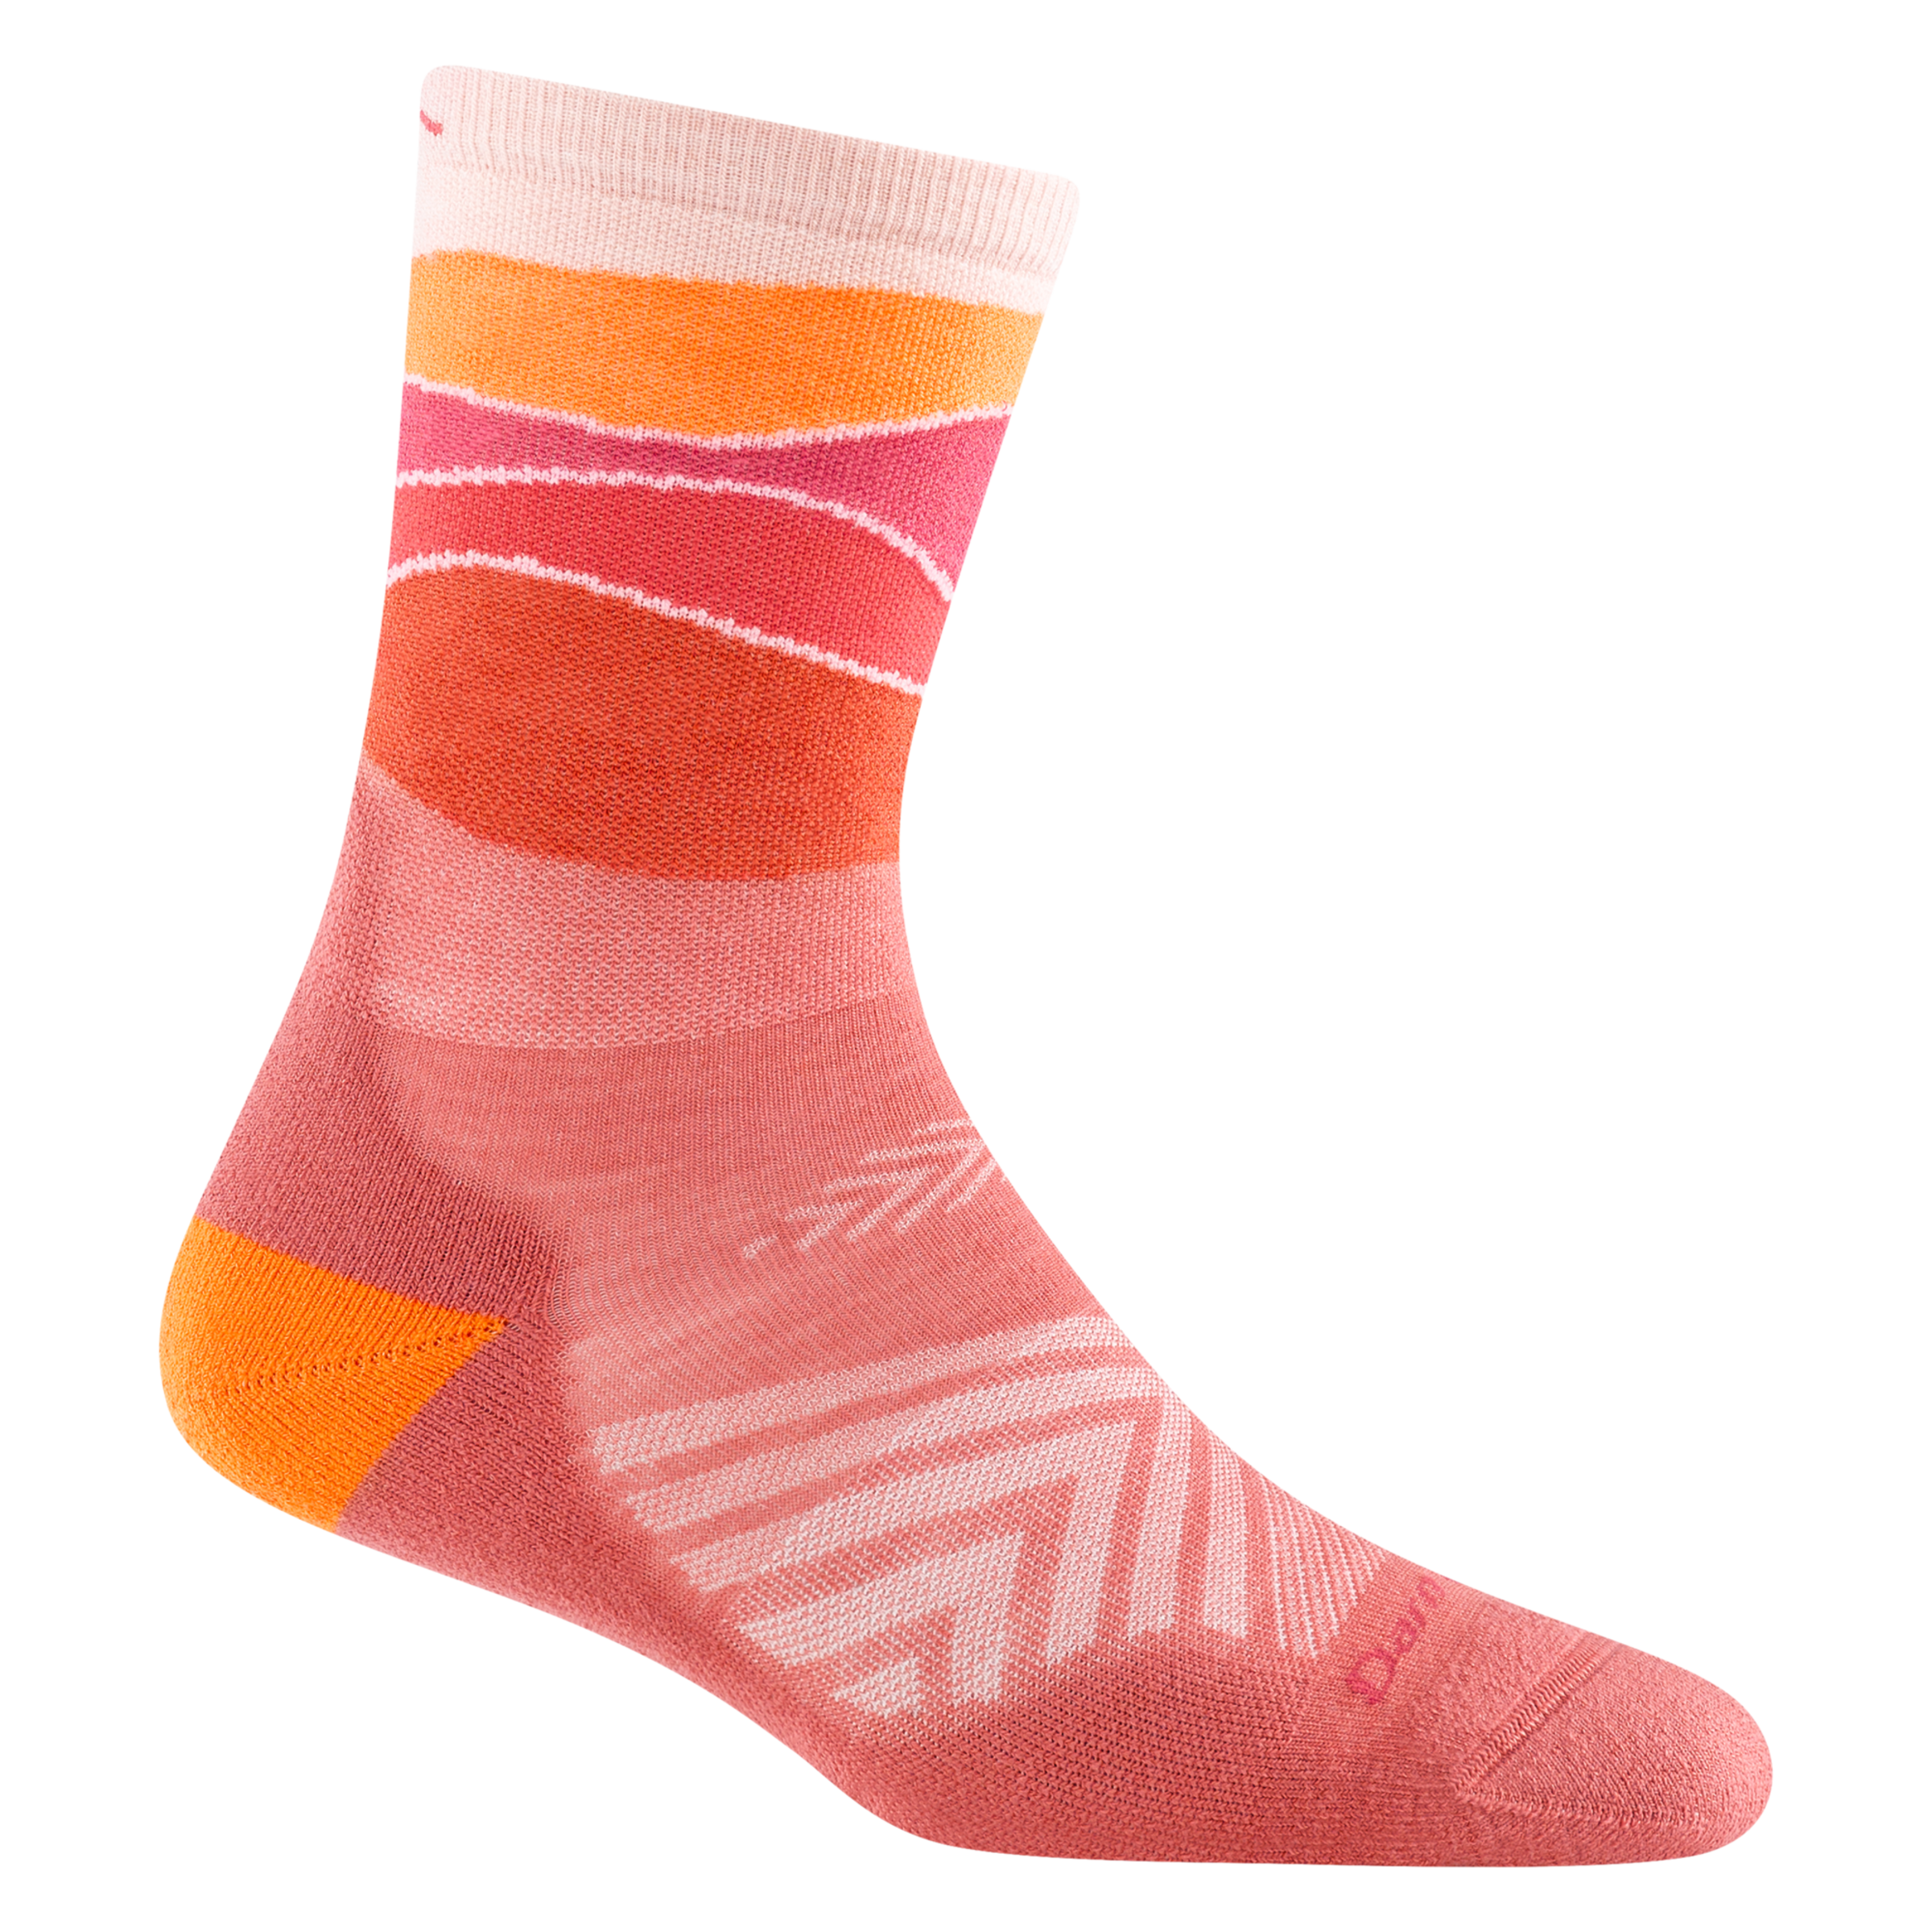 1064 Horizon micro crew running sock in canyon with an orange heel accent and pink body with waving stripes on the cuff